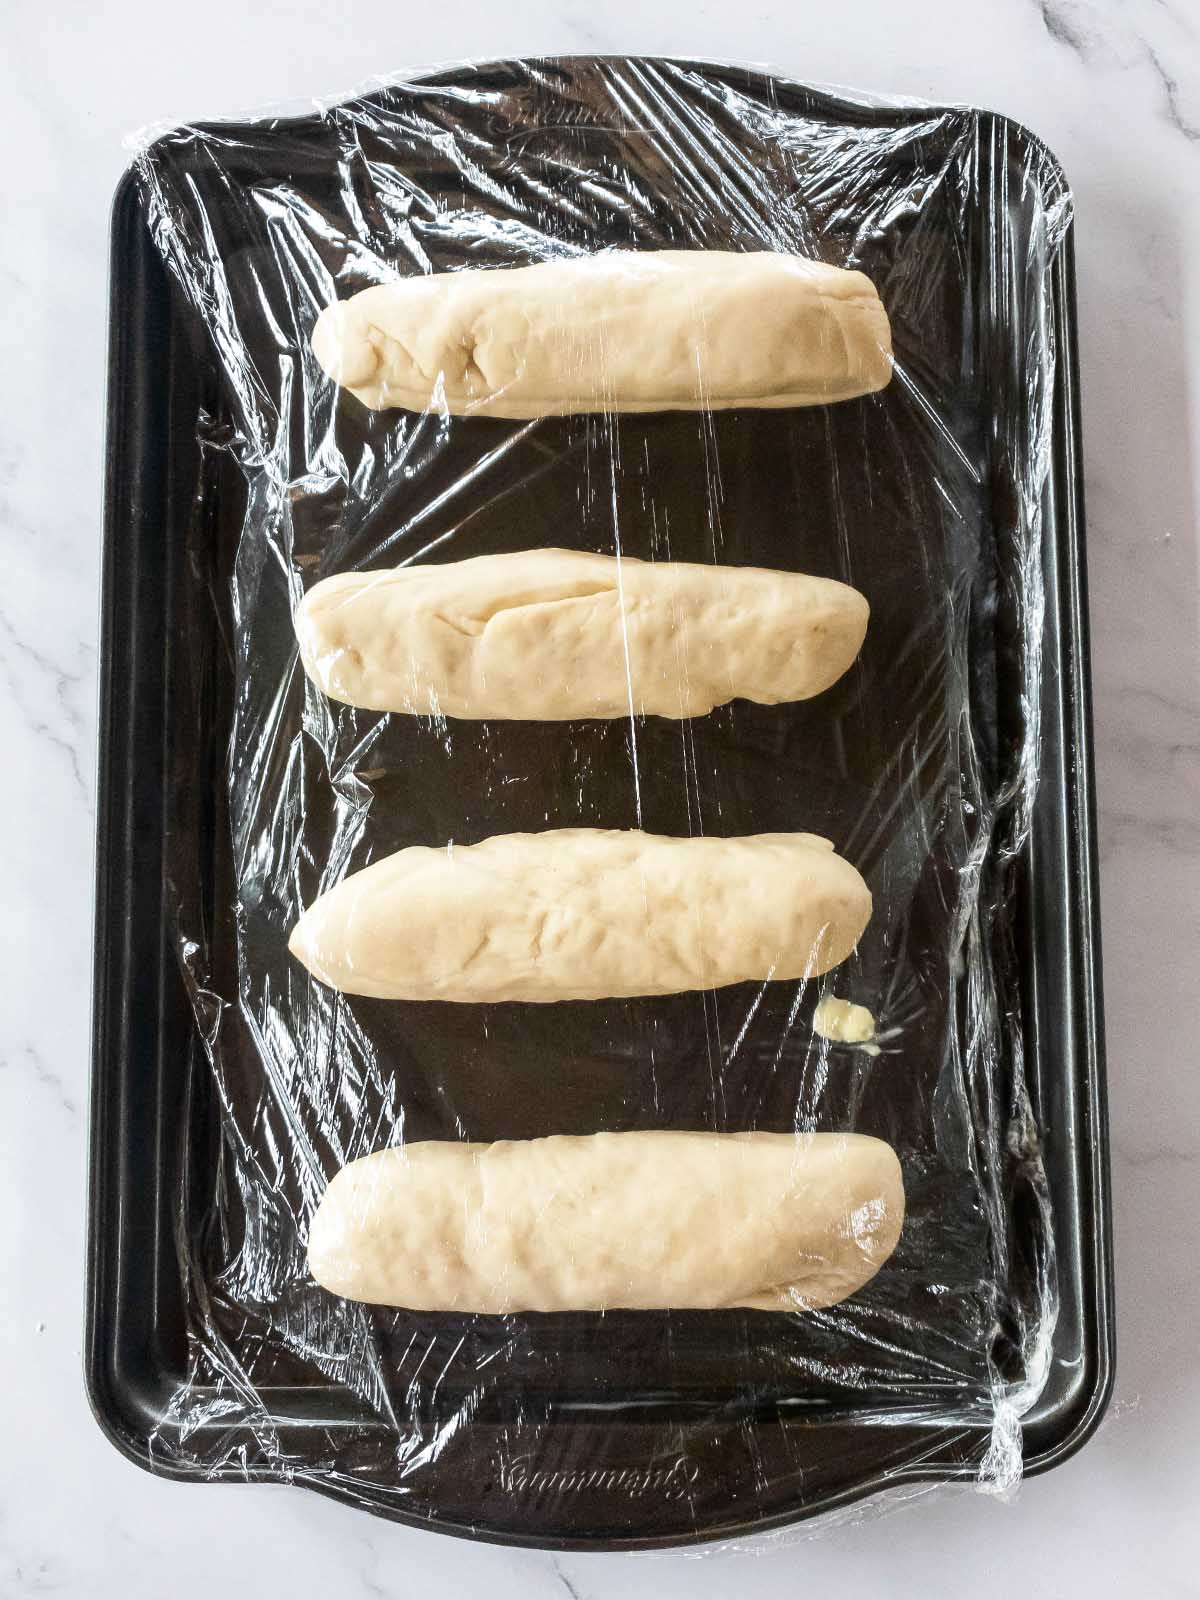 Four pieces of jimmy johns bread on a baking sheet.